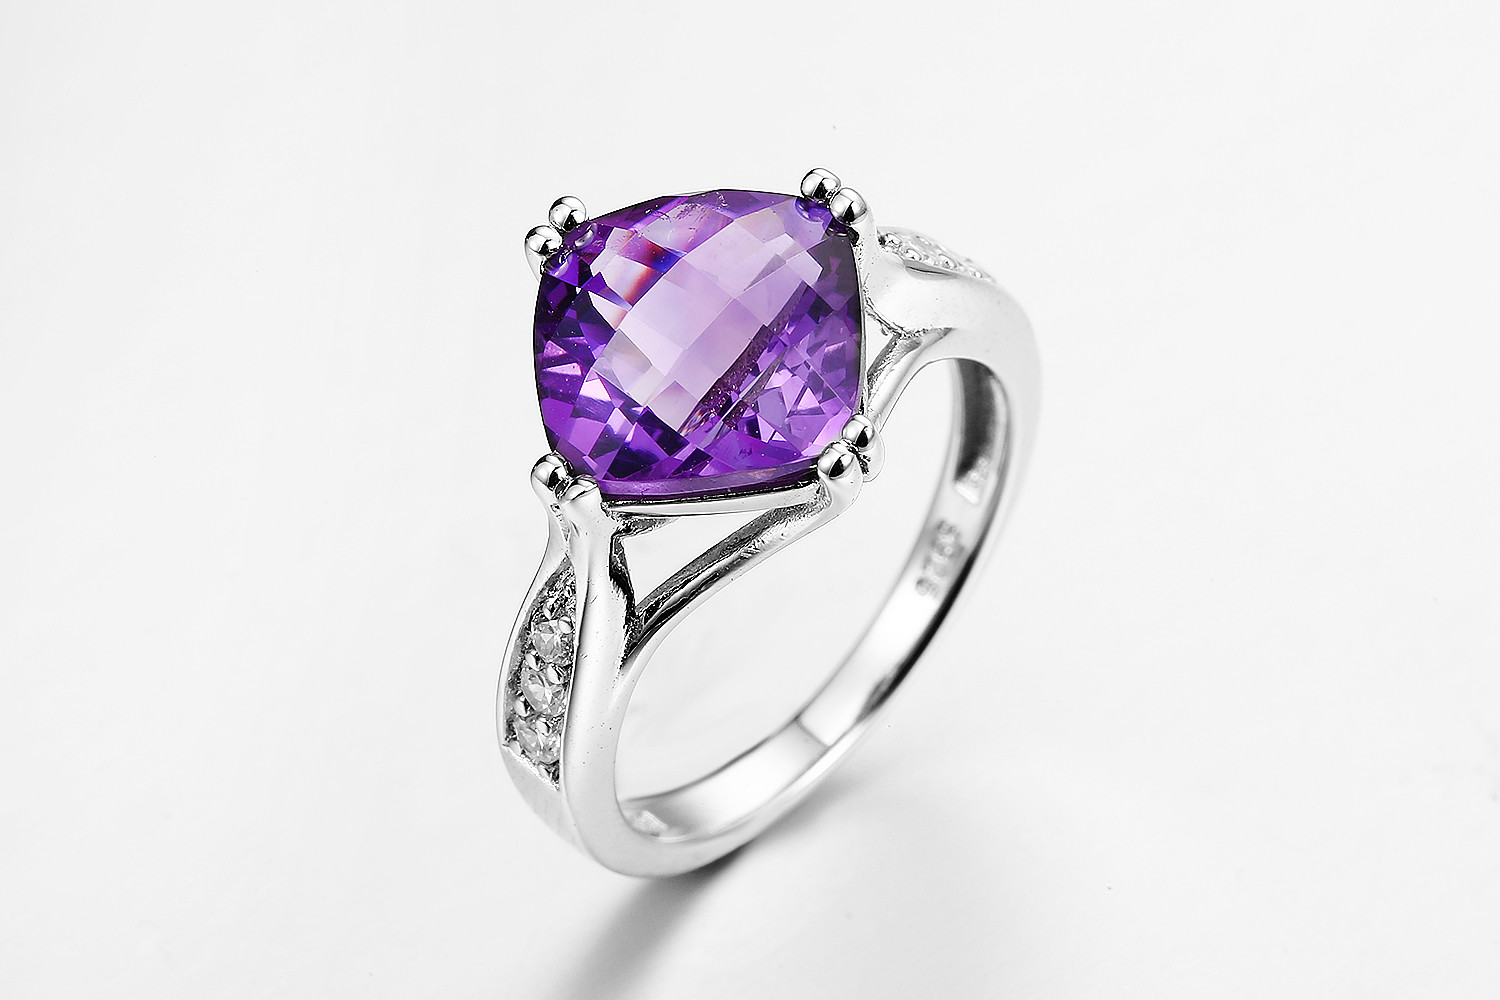 China ODM AAA Cubic Zirconia Sterling Silver Band Rings 4.0g Square Cut Amethyst wholesale